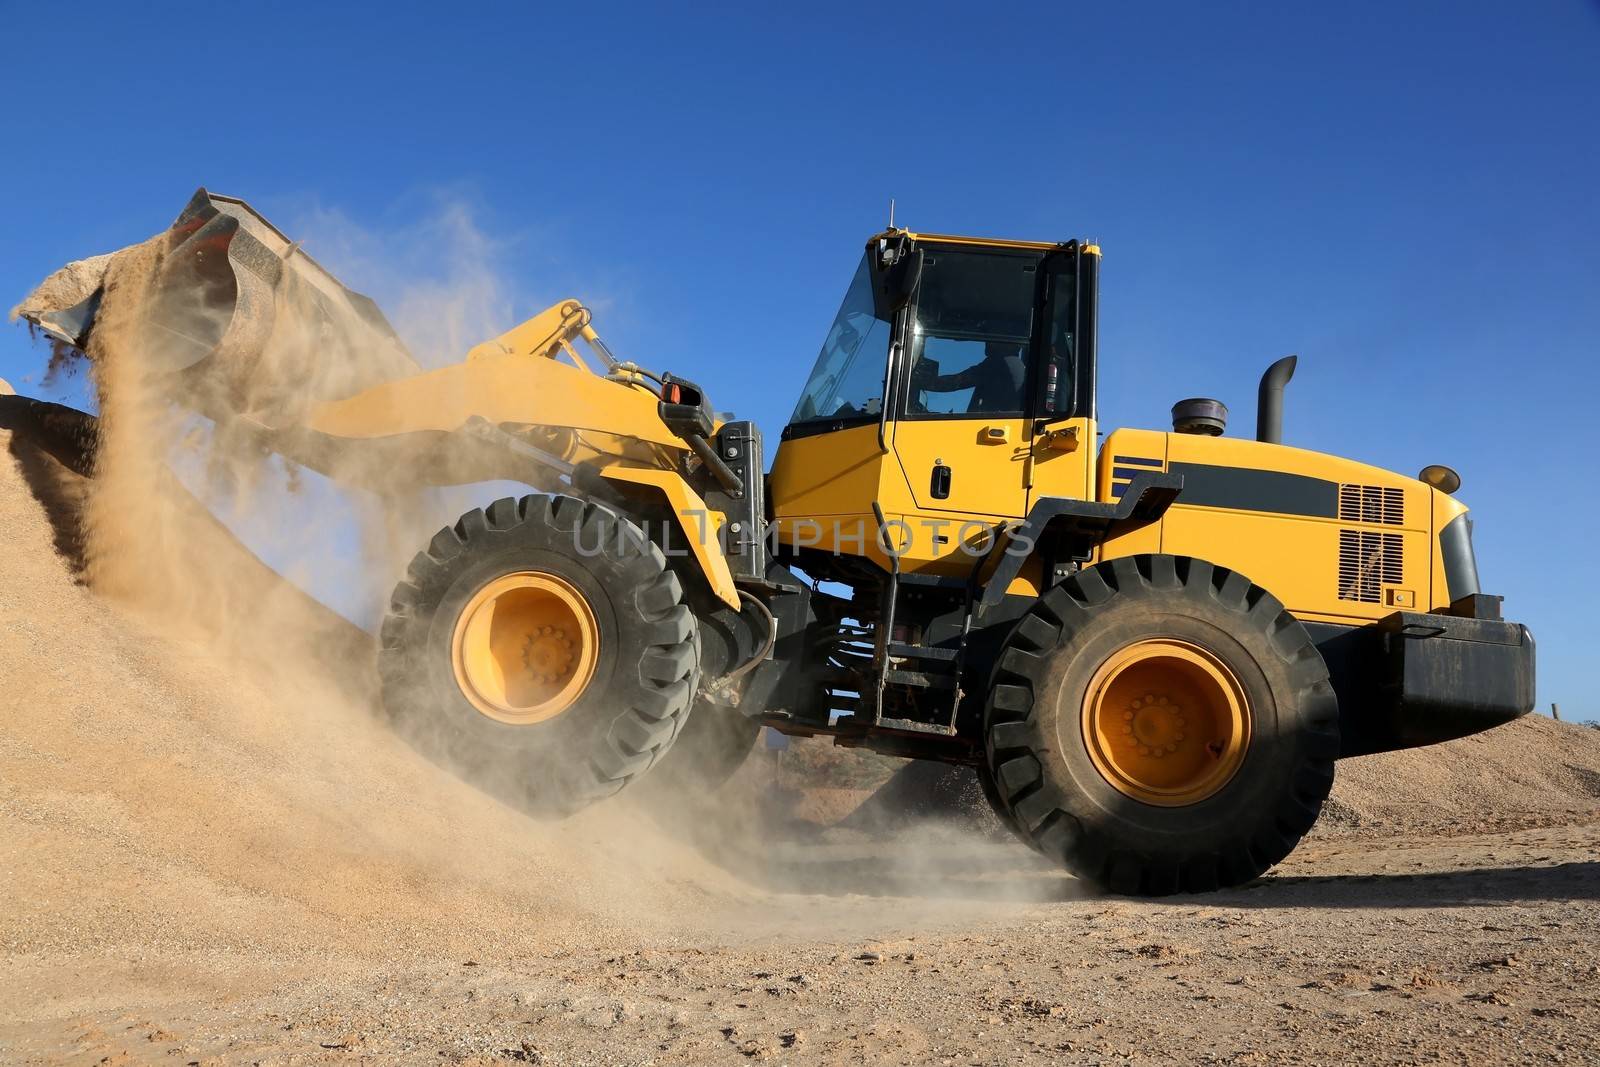 Bulldozer dumping stone and sand in a mining quarry